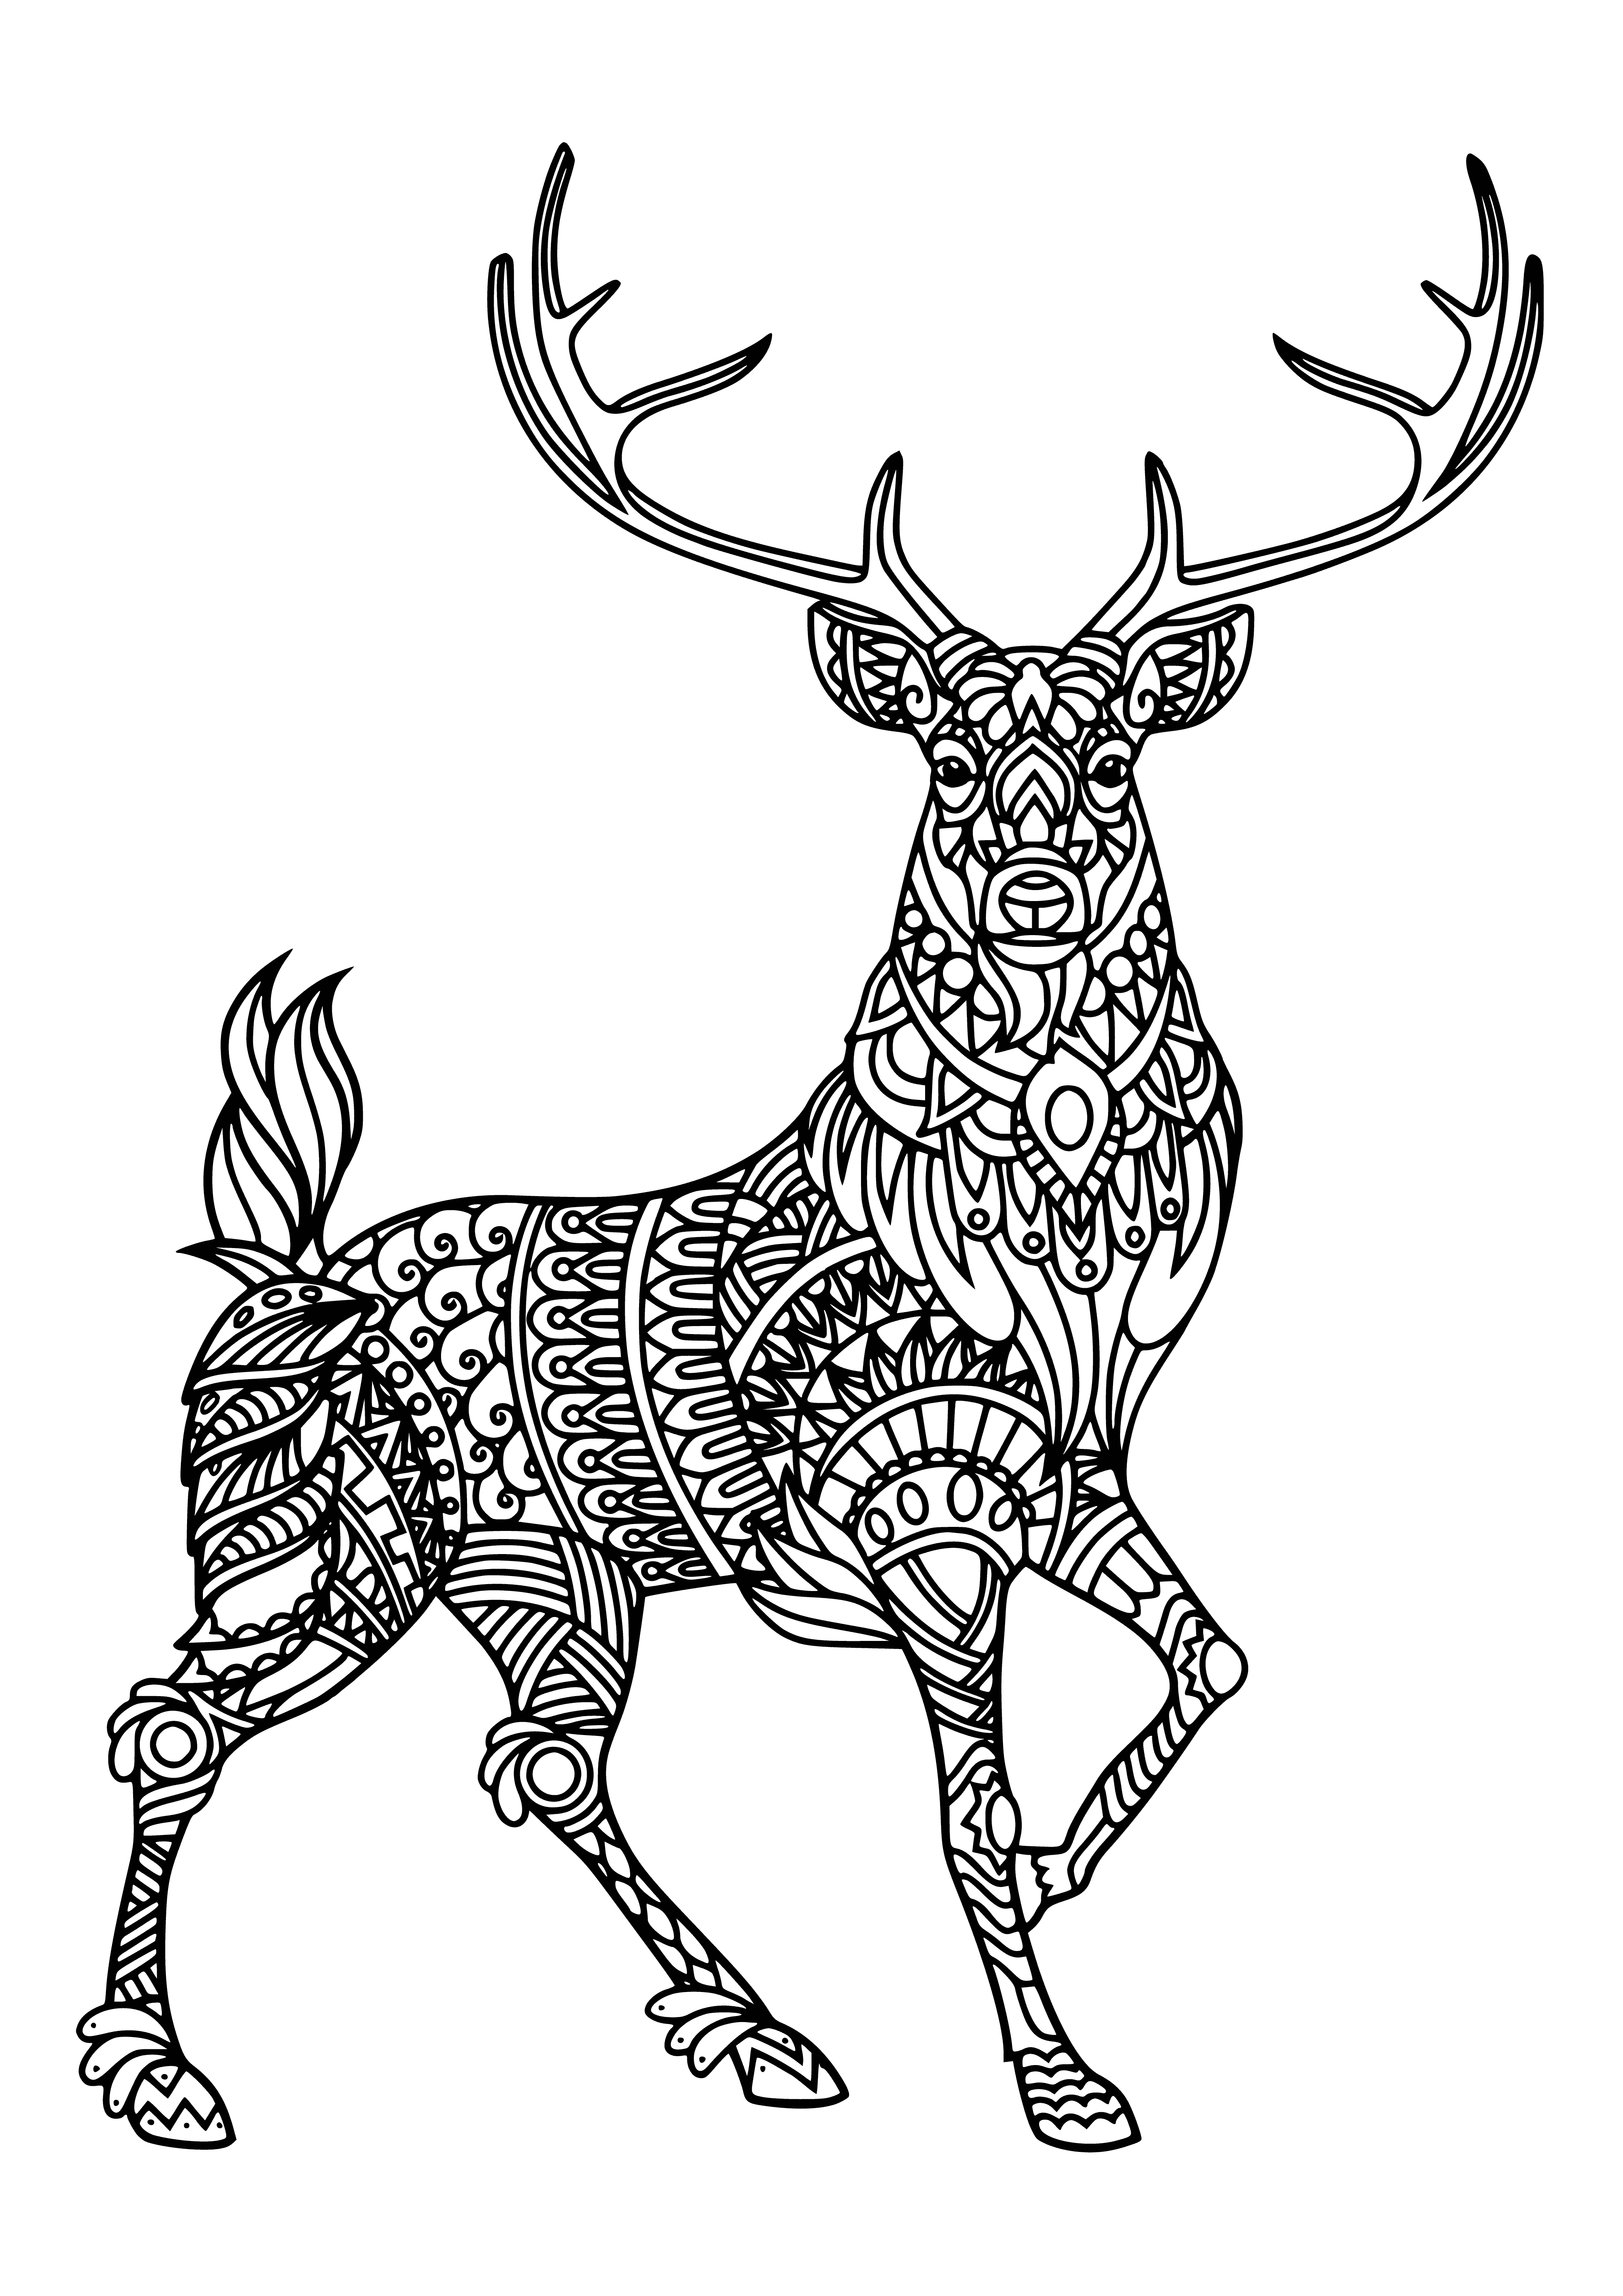 coloring page: A deer stands in a sunlit forest with a light coat of fur and horns visible, gazing at the viewer with its big brown eyes. #Nature